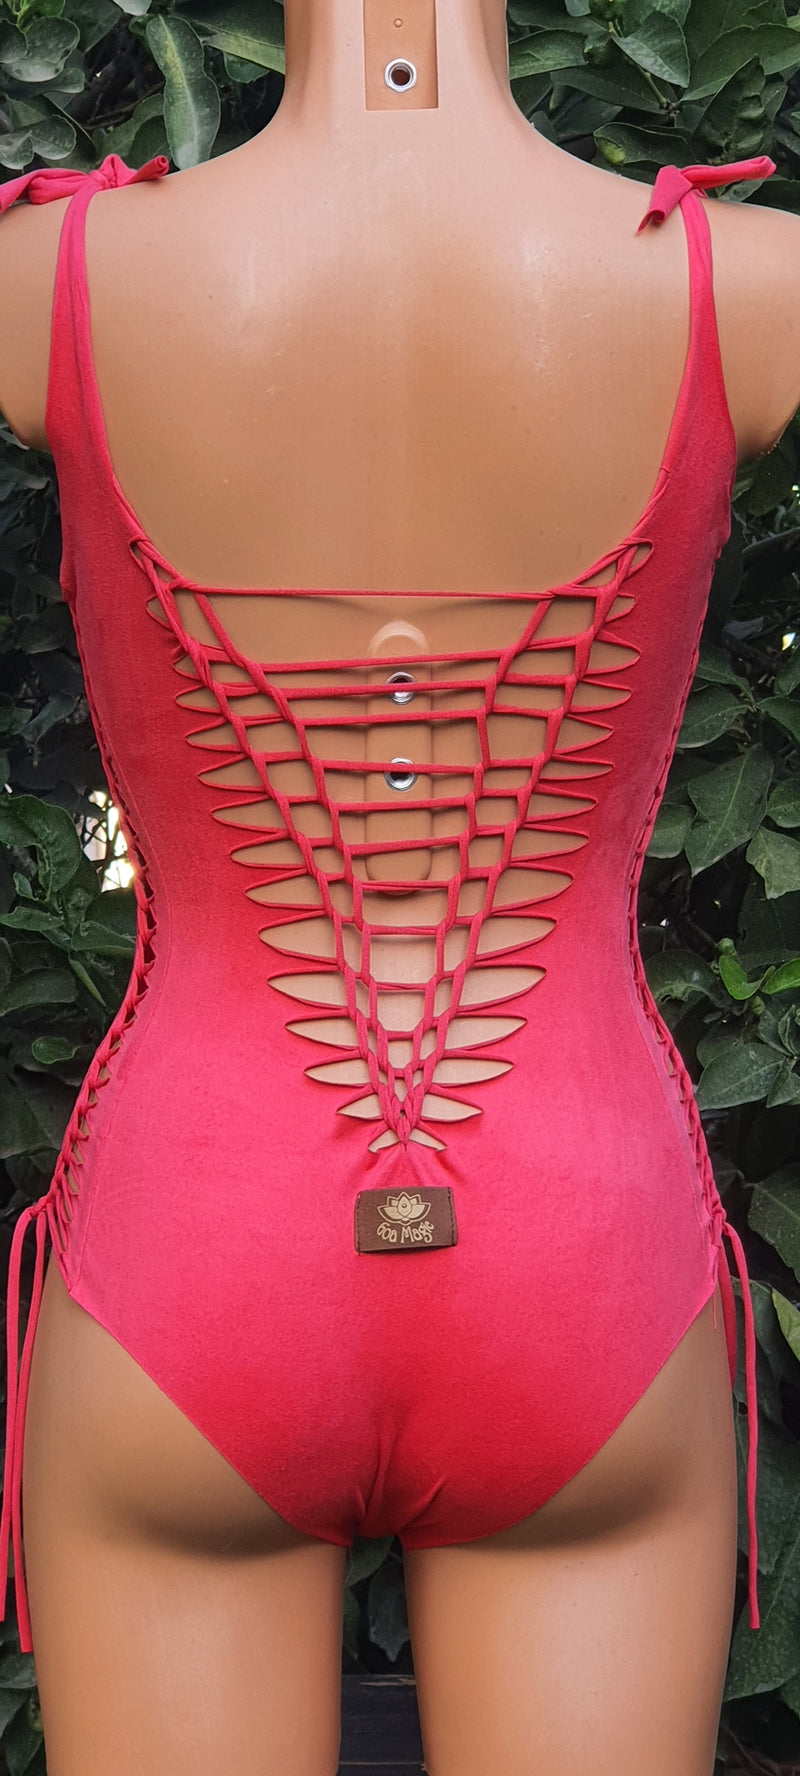 Clearance - Suede Look Pink One Piece Swimsuit For Women "DELI"